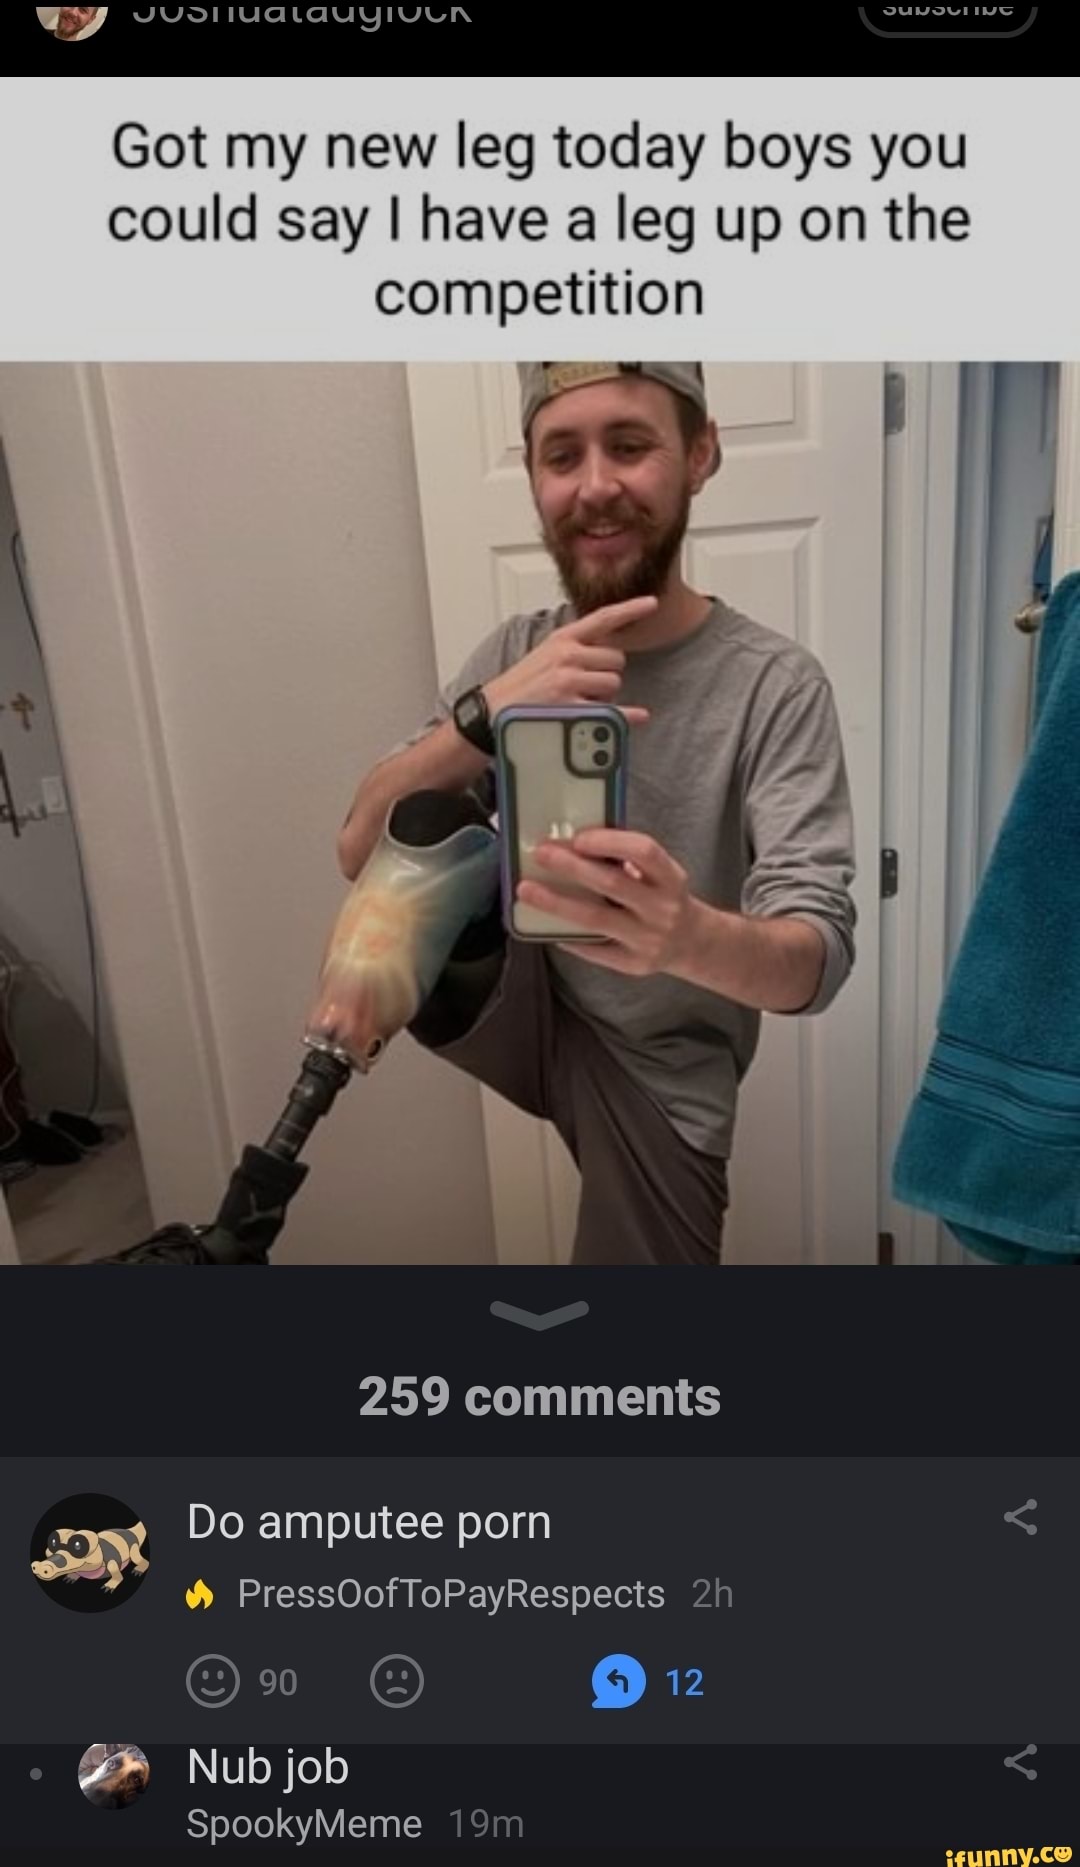 1080px x 1867px - Wy Got my new leg today boys you could say I have a leg up on the  competition 259 comments Do amputee porn PressOofToPayRespects 12 Nub job  SpookyMeme - iFunny Brazil